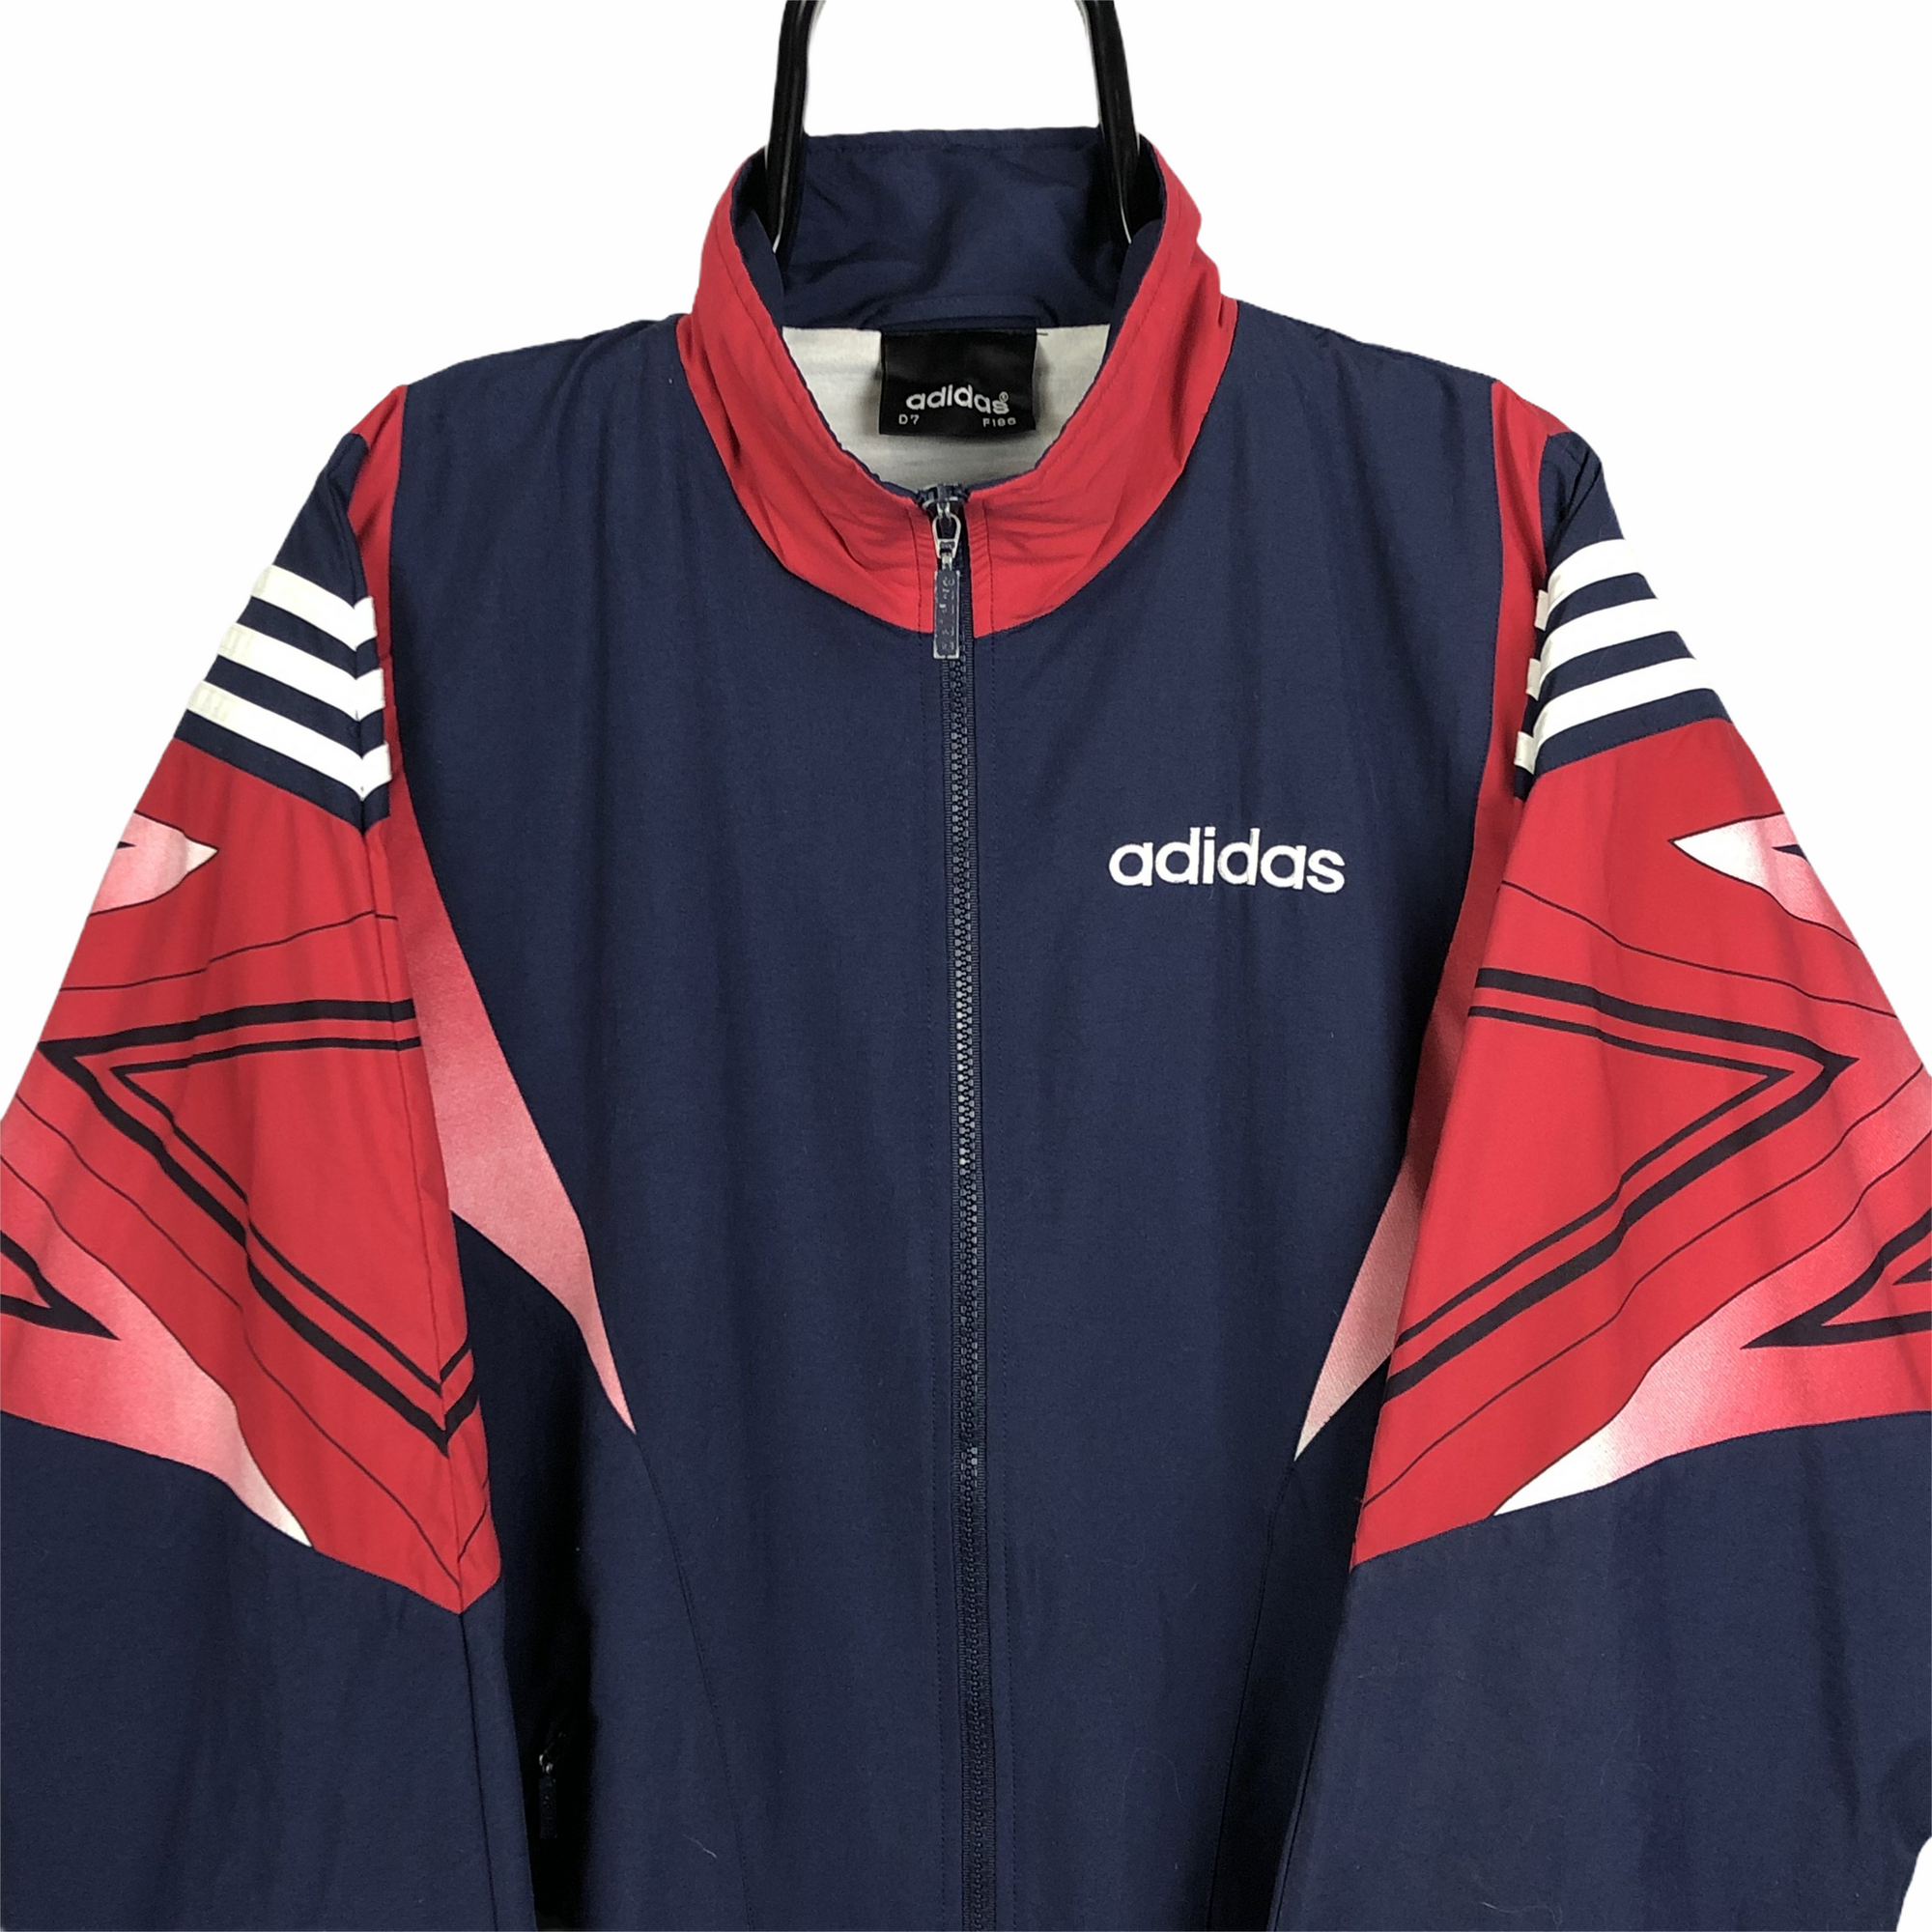 Vintage Adidas Track Jacket in Navy/Red/White - Men's Large/Women's XL